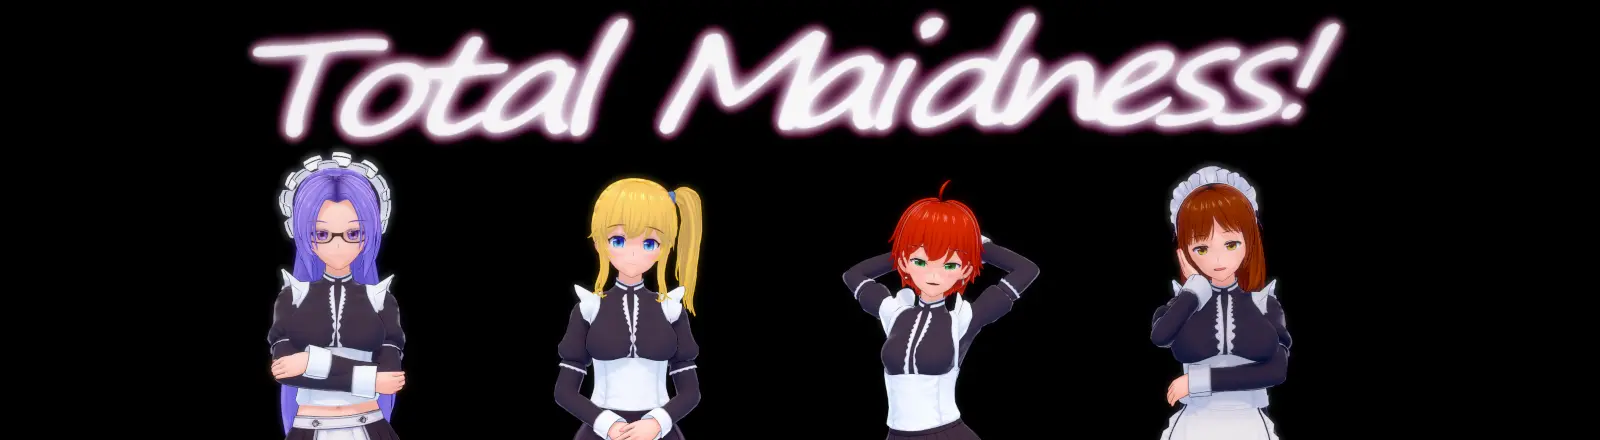 Total Maidness! main image